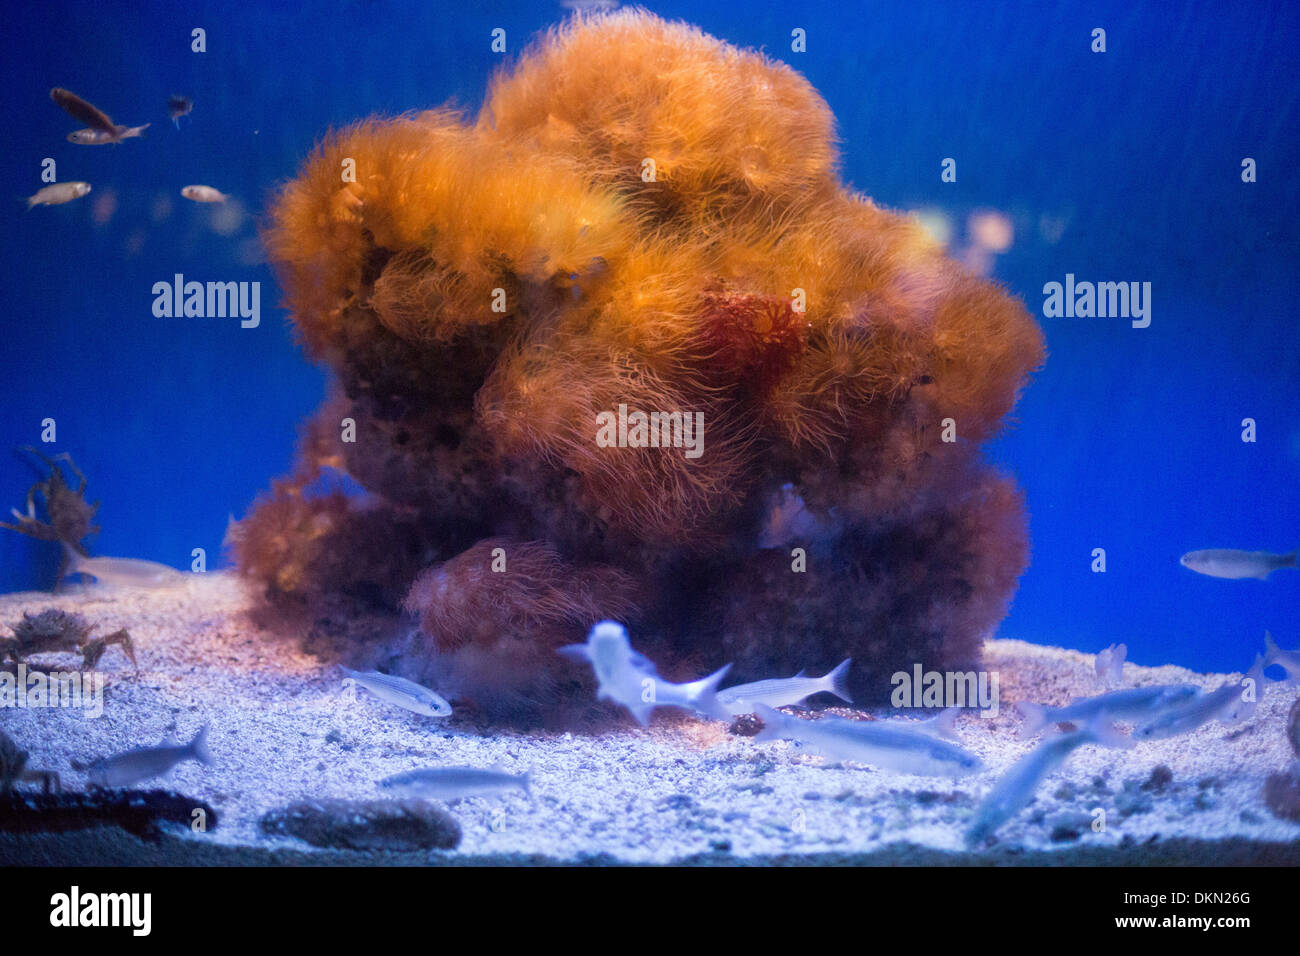 Fish and coral on display at the Oceanographic Museum, Monte Carlo, Monaco Stock Photo